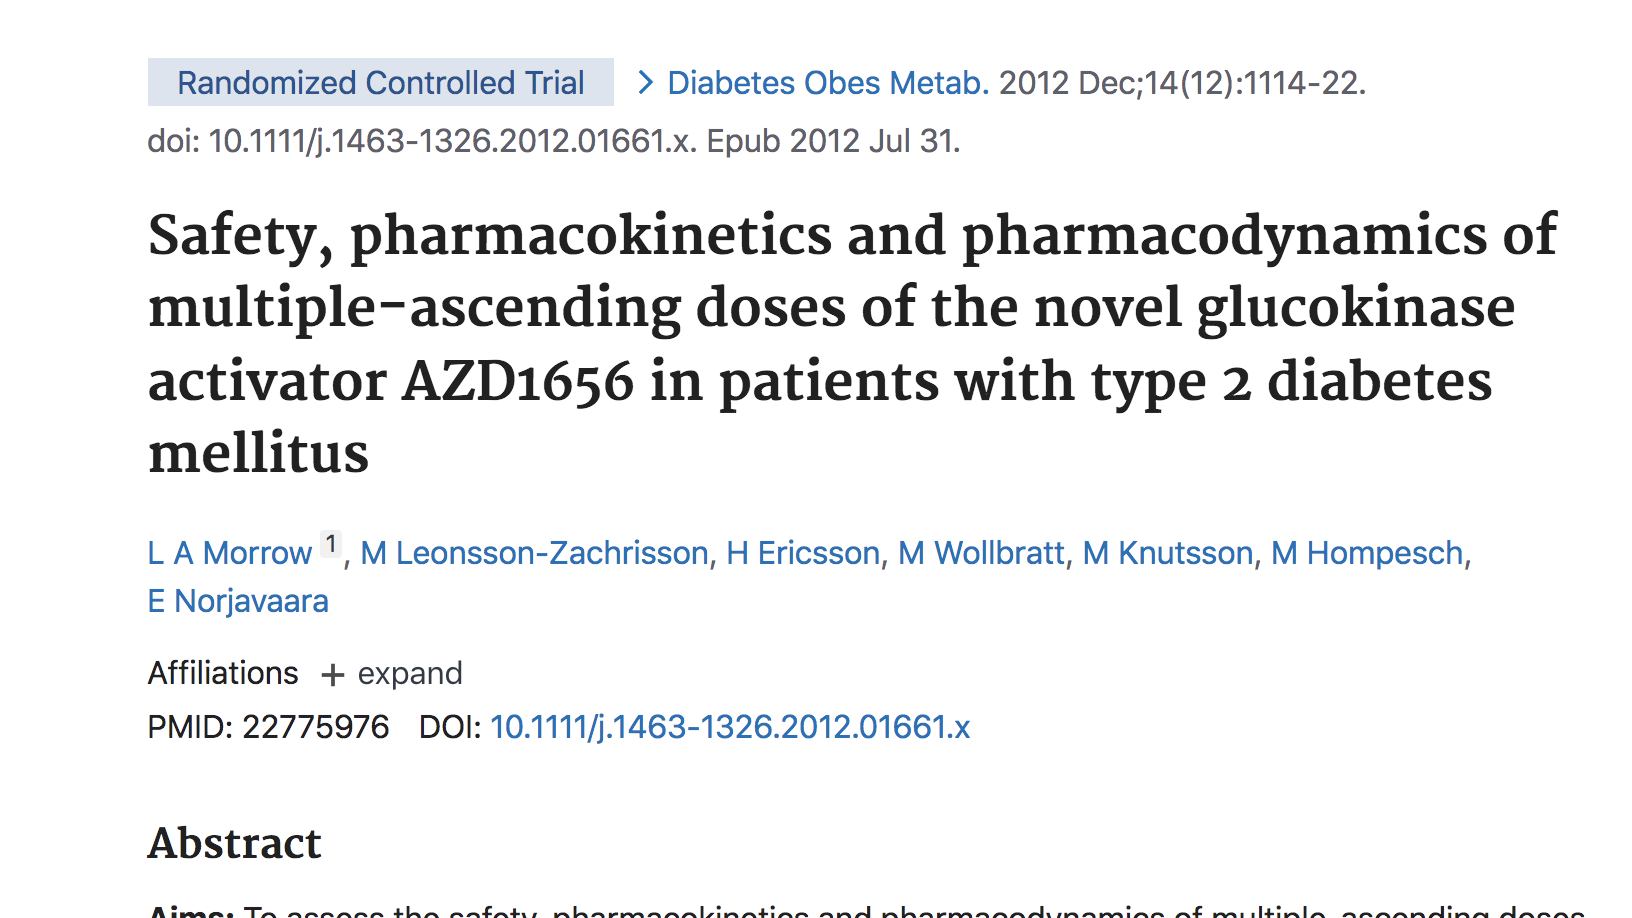 Safety, pharmacokinetics and pharmacodynamics of multiple-ascending doses of the novel glucokinase activator AZD1656 in patients with type 2 diabetes mellitus thumbnail